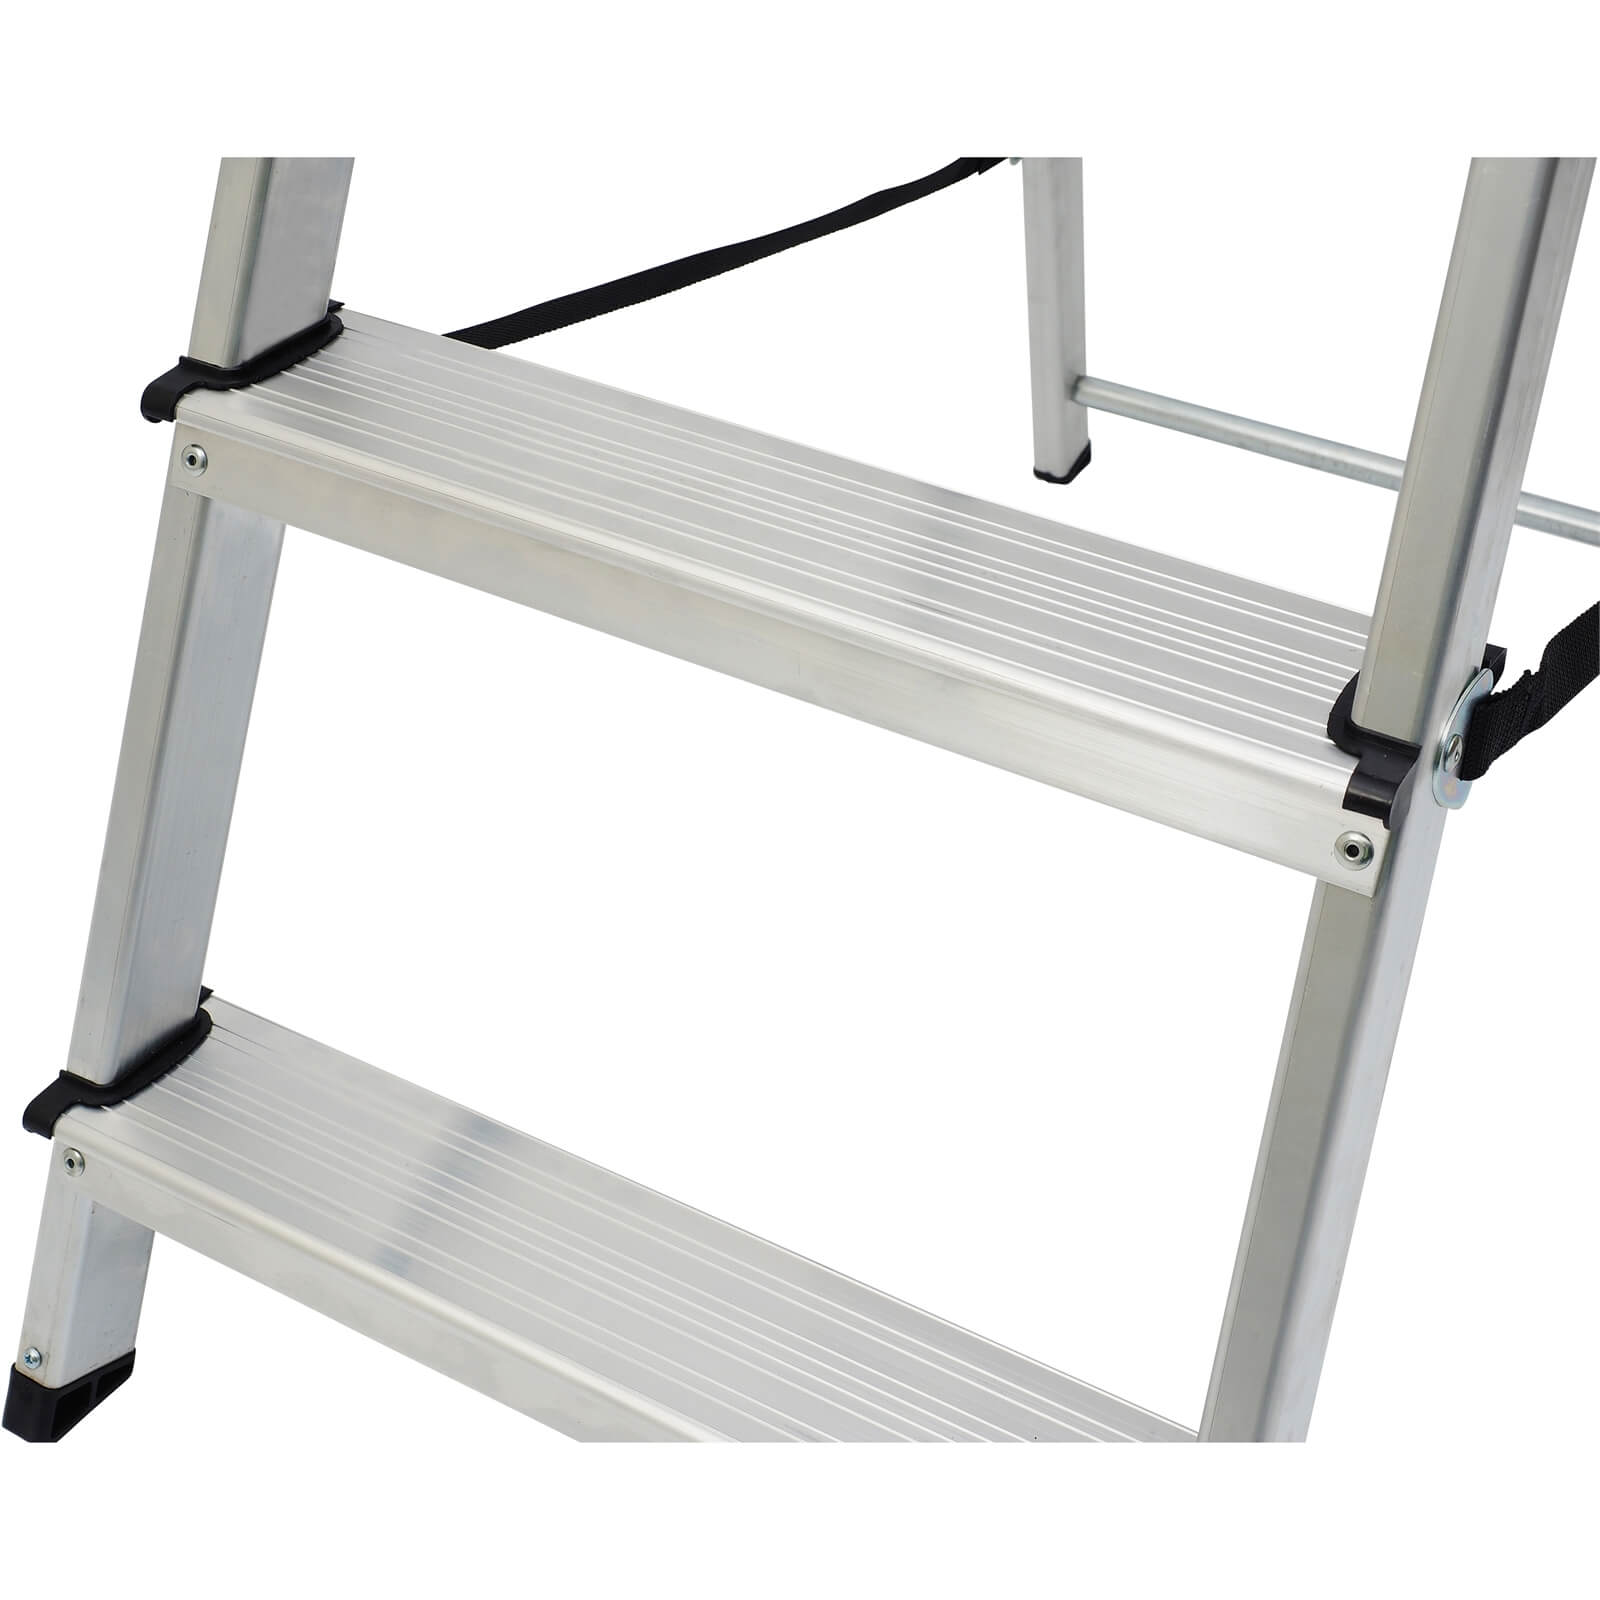 Werner High Handrail Step Ladder with Tool Tray - 8 Tread